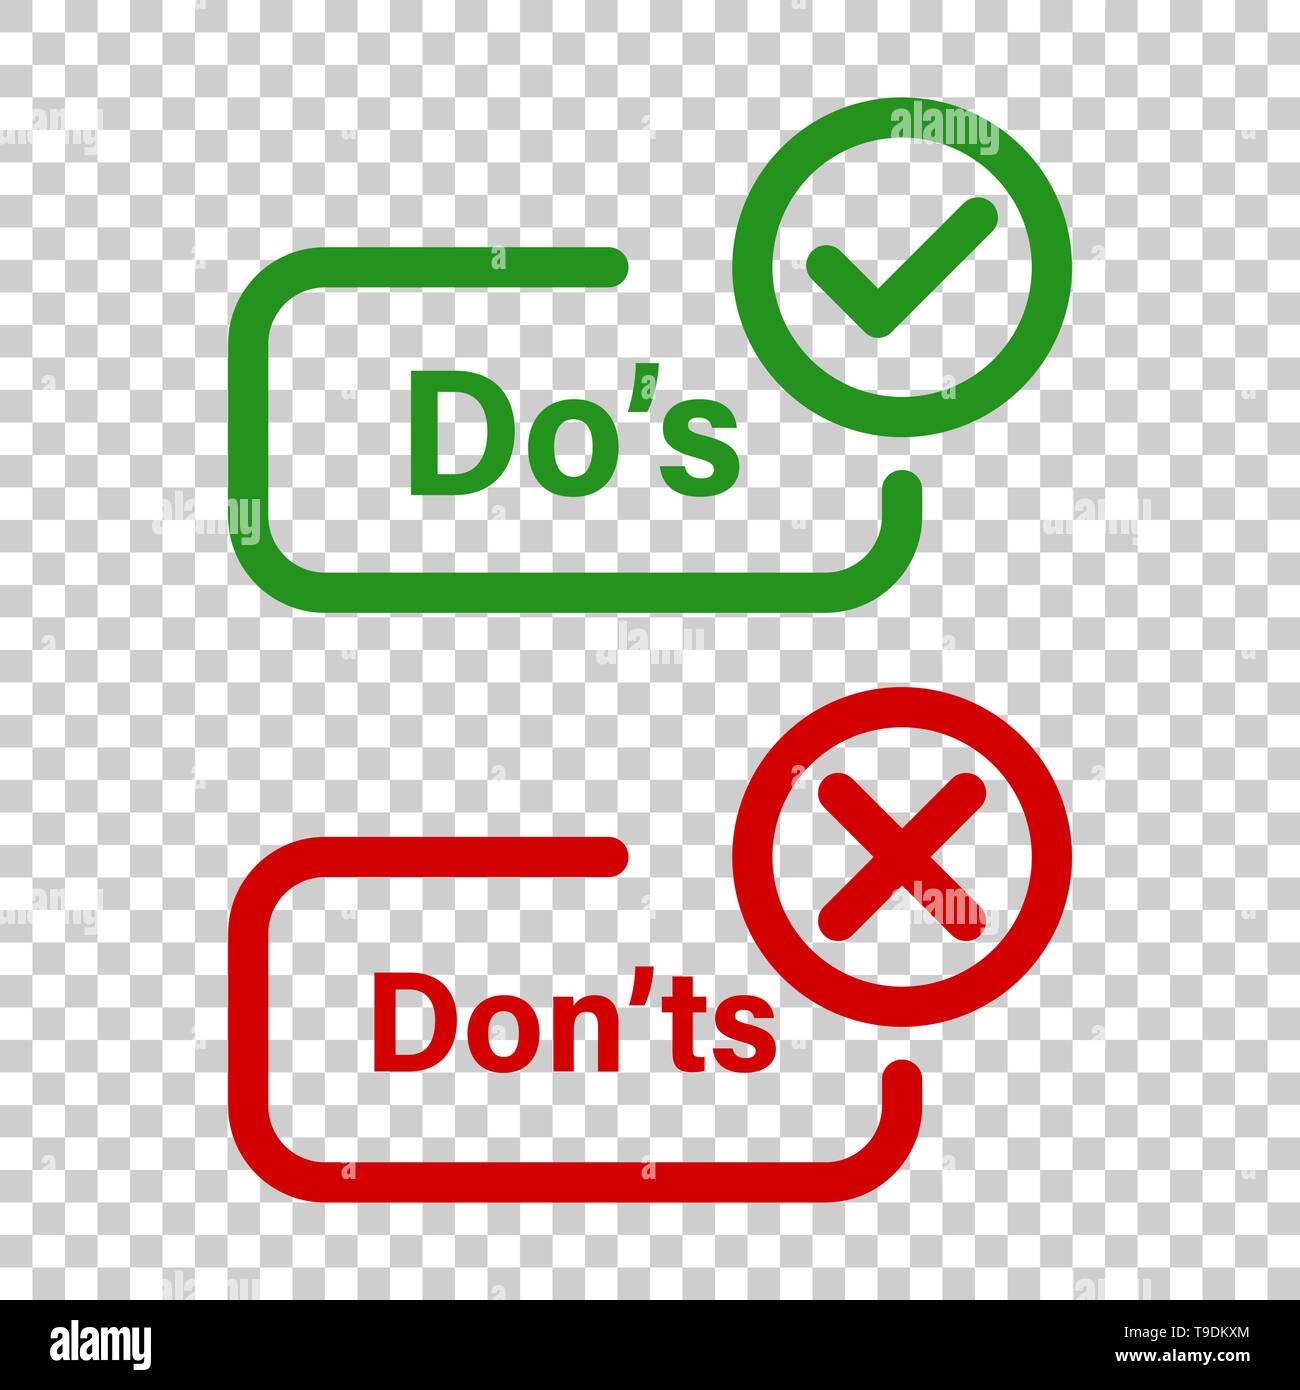 Do's and don'ts sign icon in transparent style. Like, unlike vector illustration on isolated background. Yes, no business concept. Stock Vector